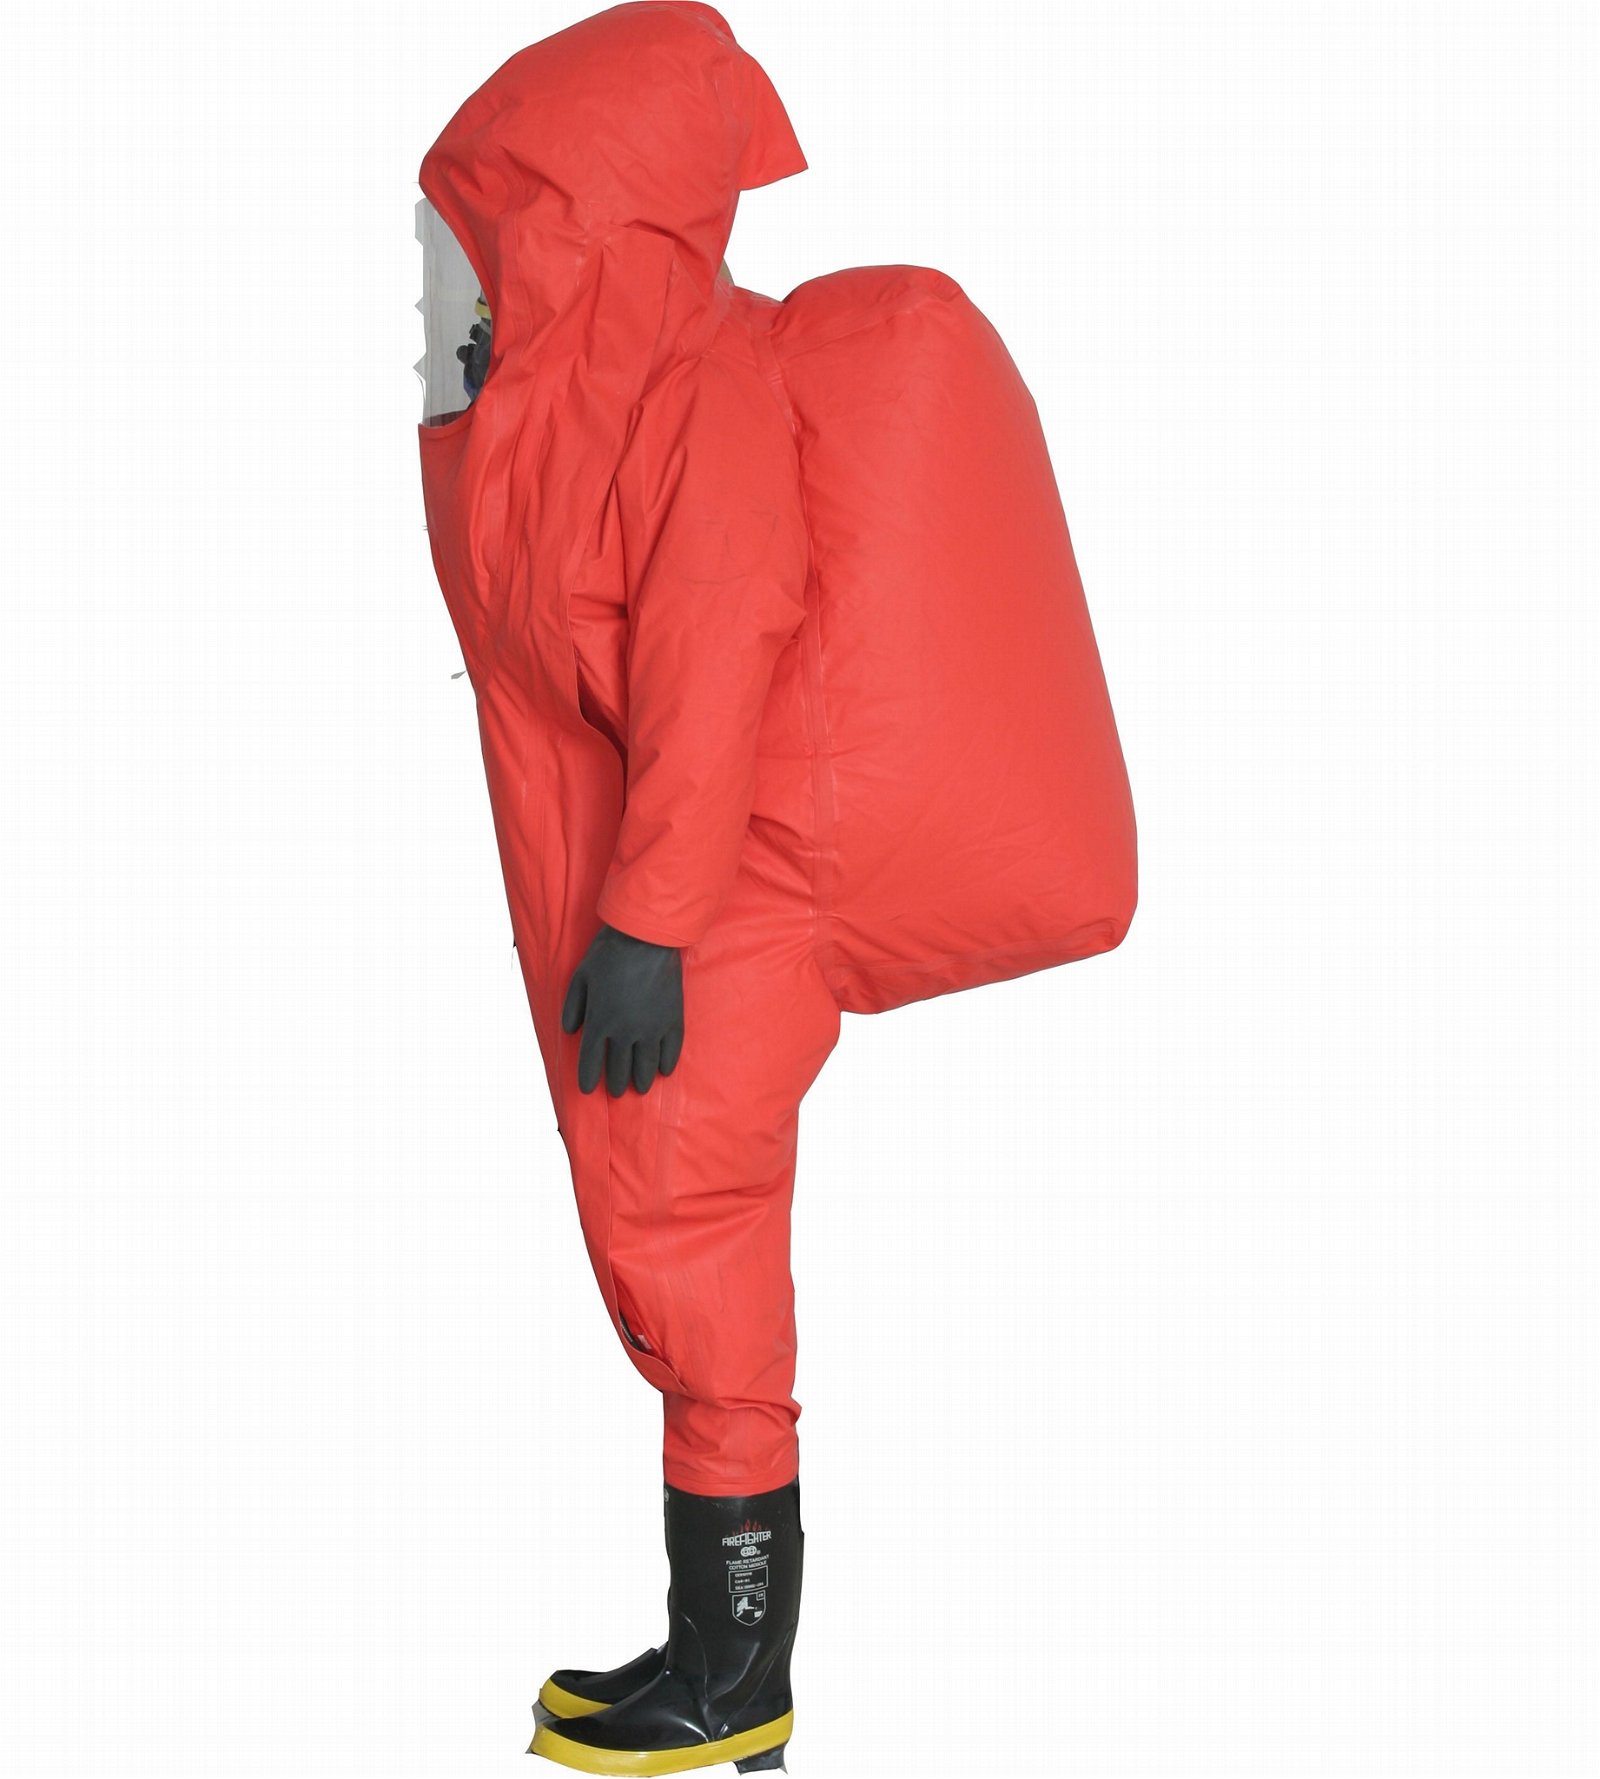 Gas tight chemical protective suit 2